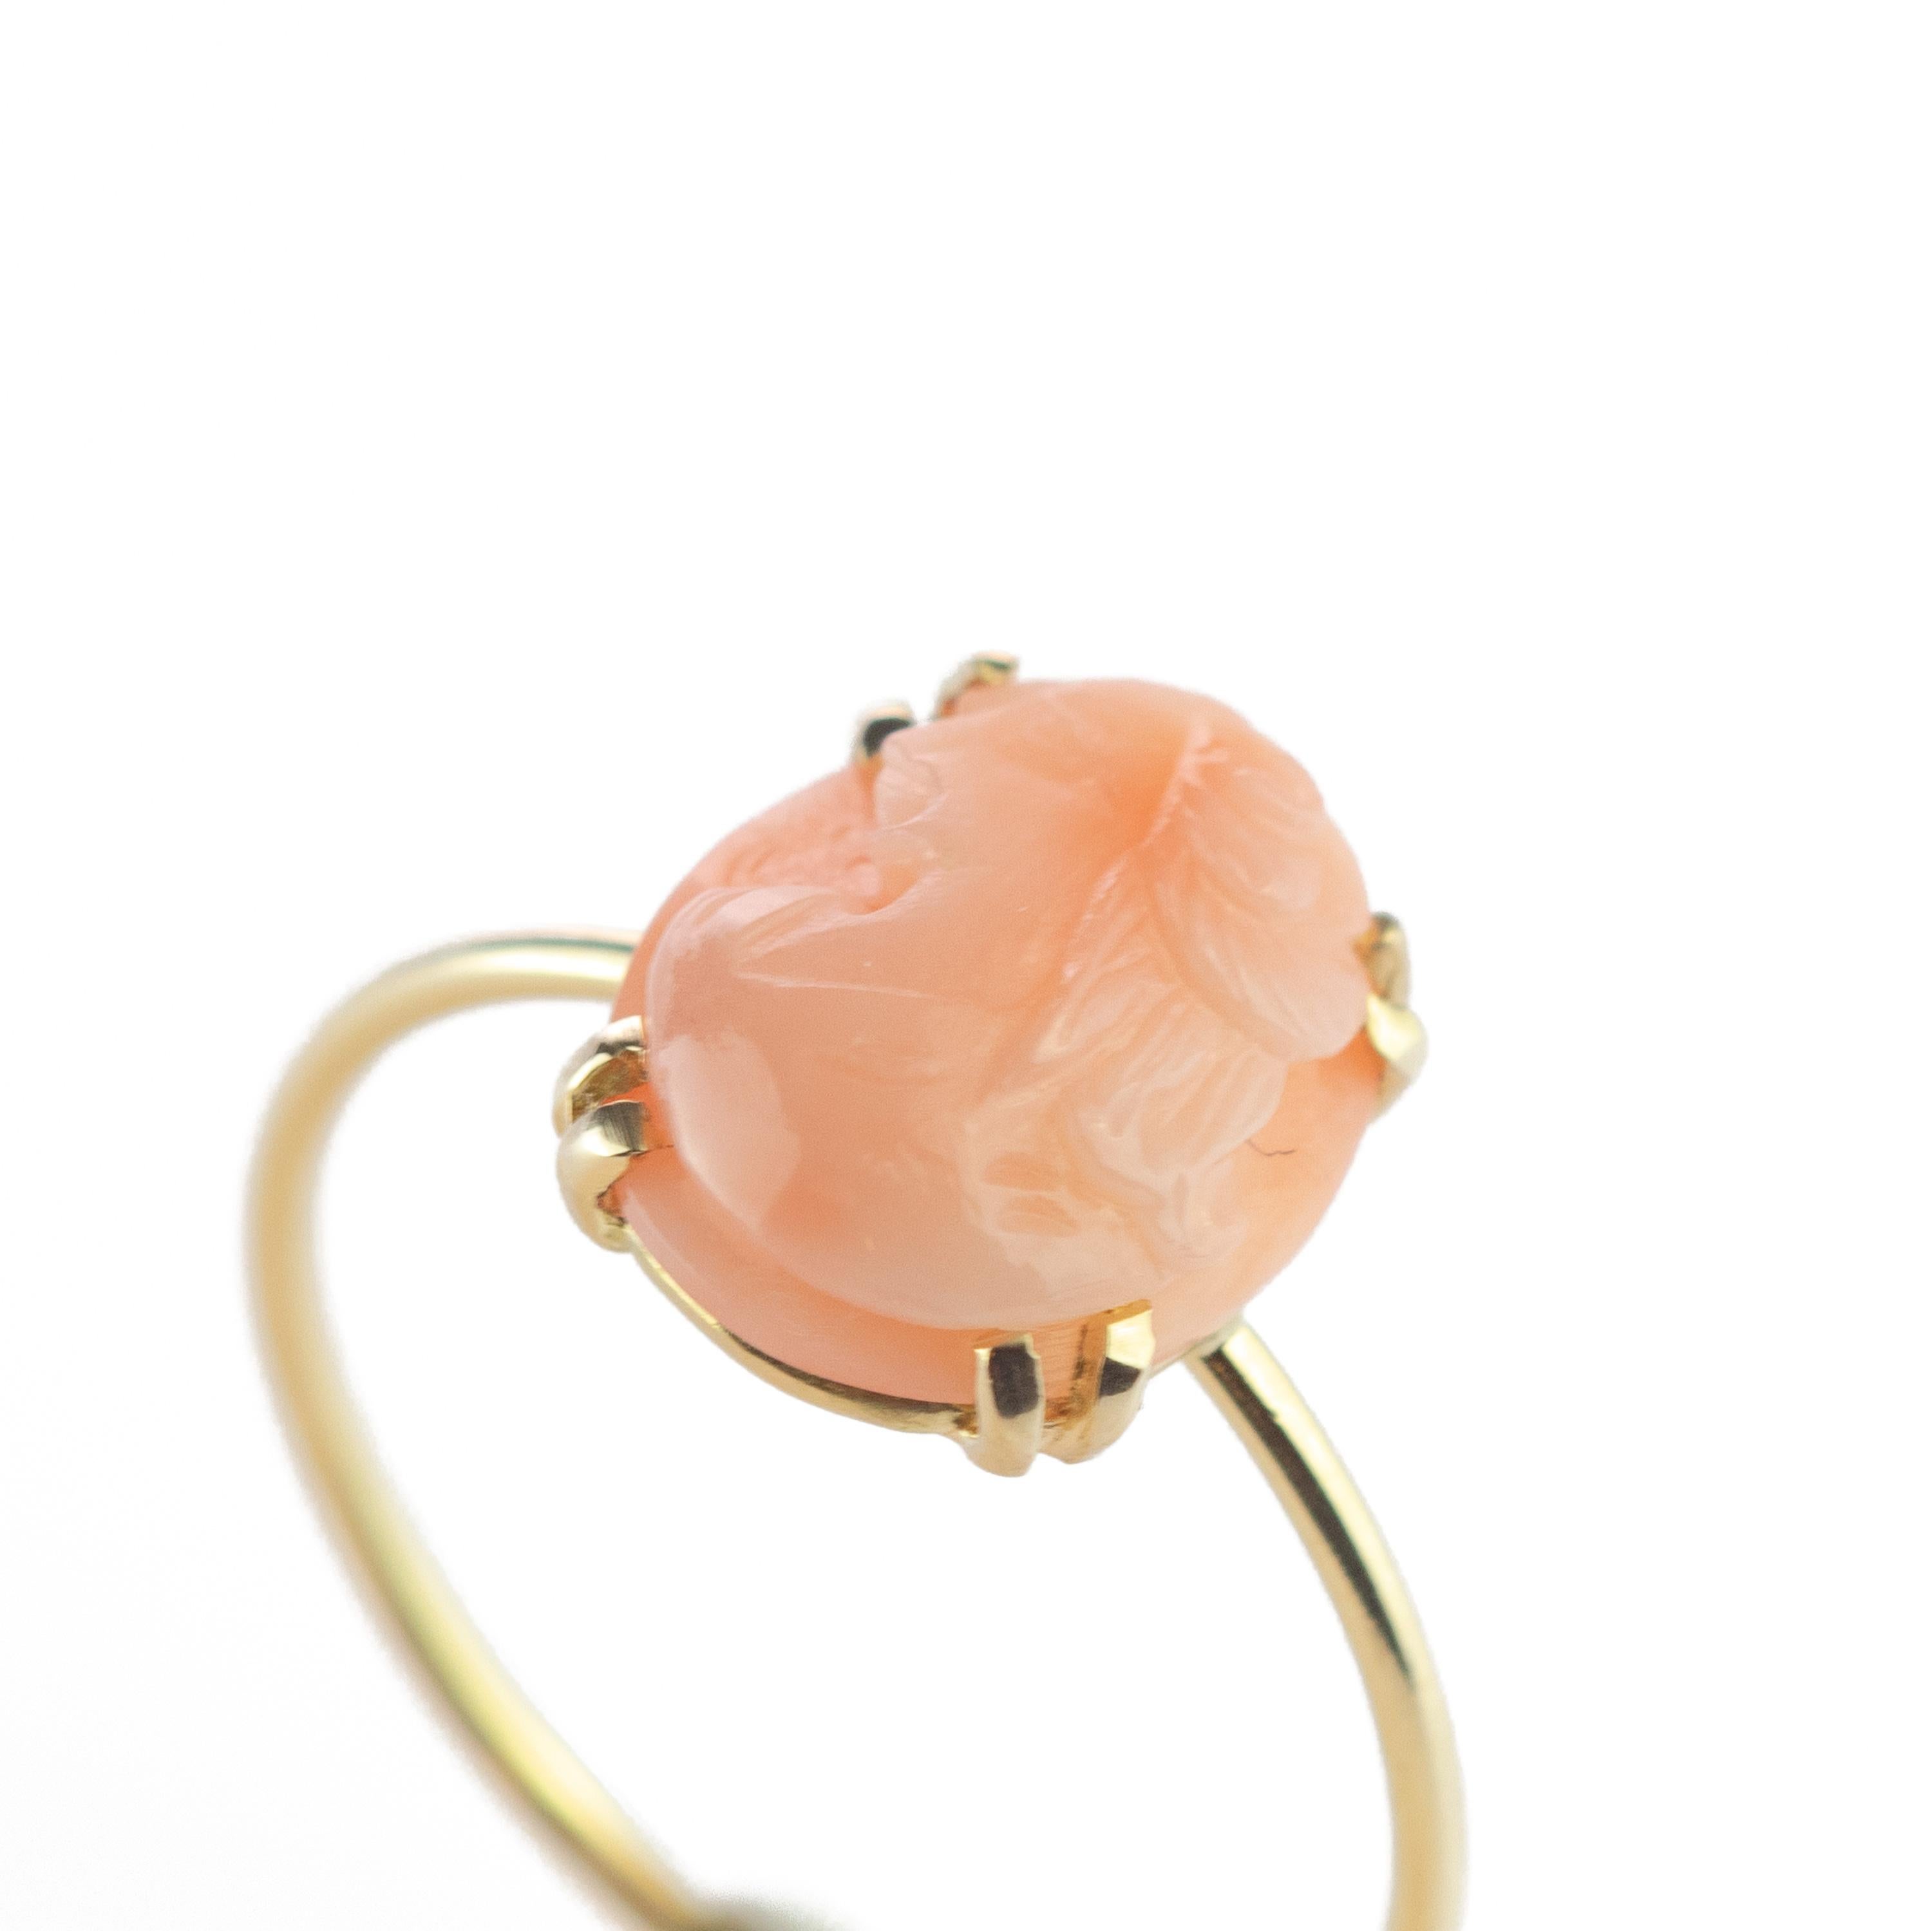 Artisan Intini Jewels 2.5 Carat Pink Cameo Coral 9 Karat Gold Oval Handmade Chic Ring For Sale